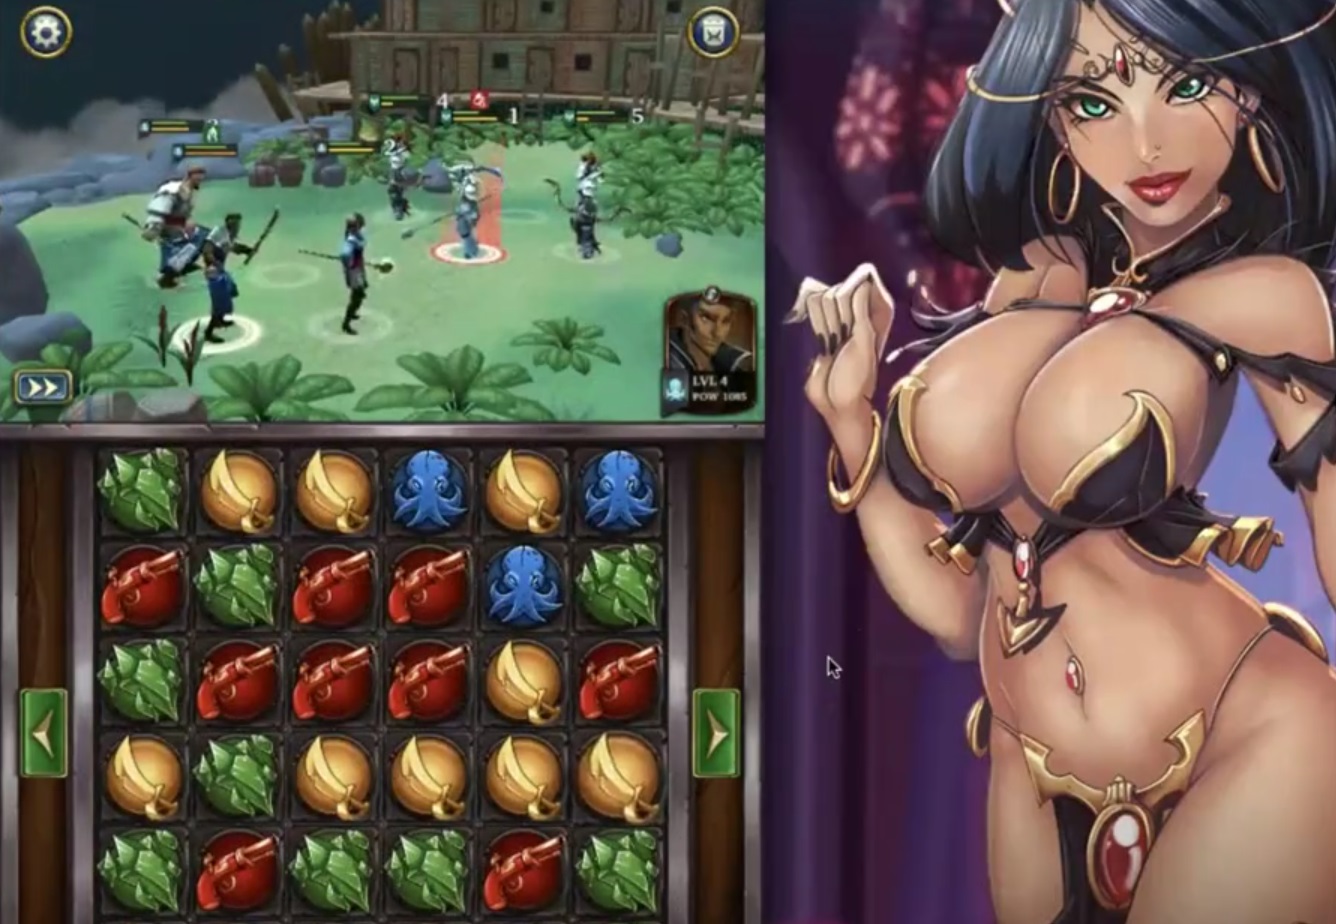 Adult game for mobile